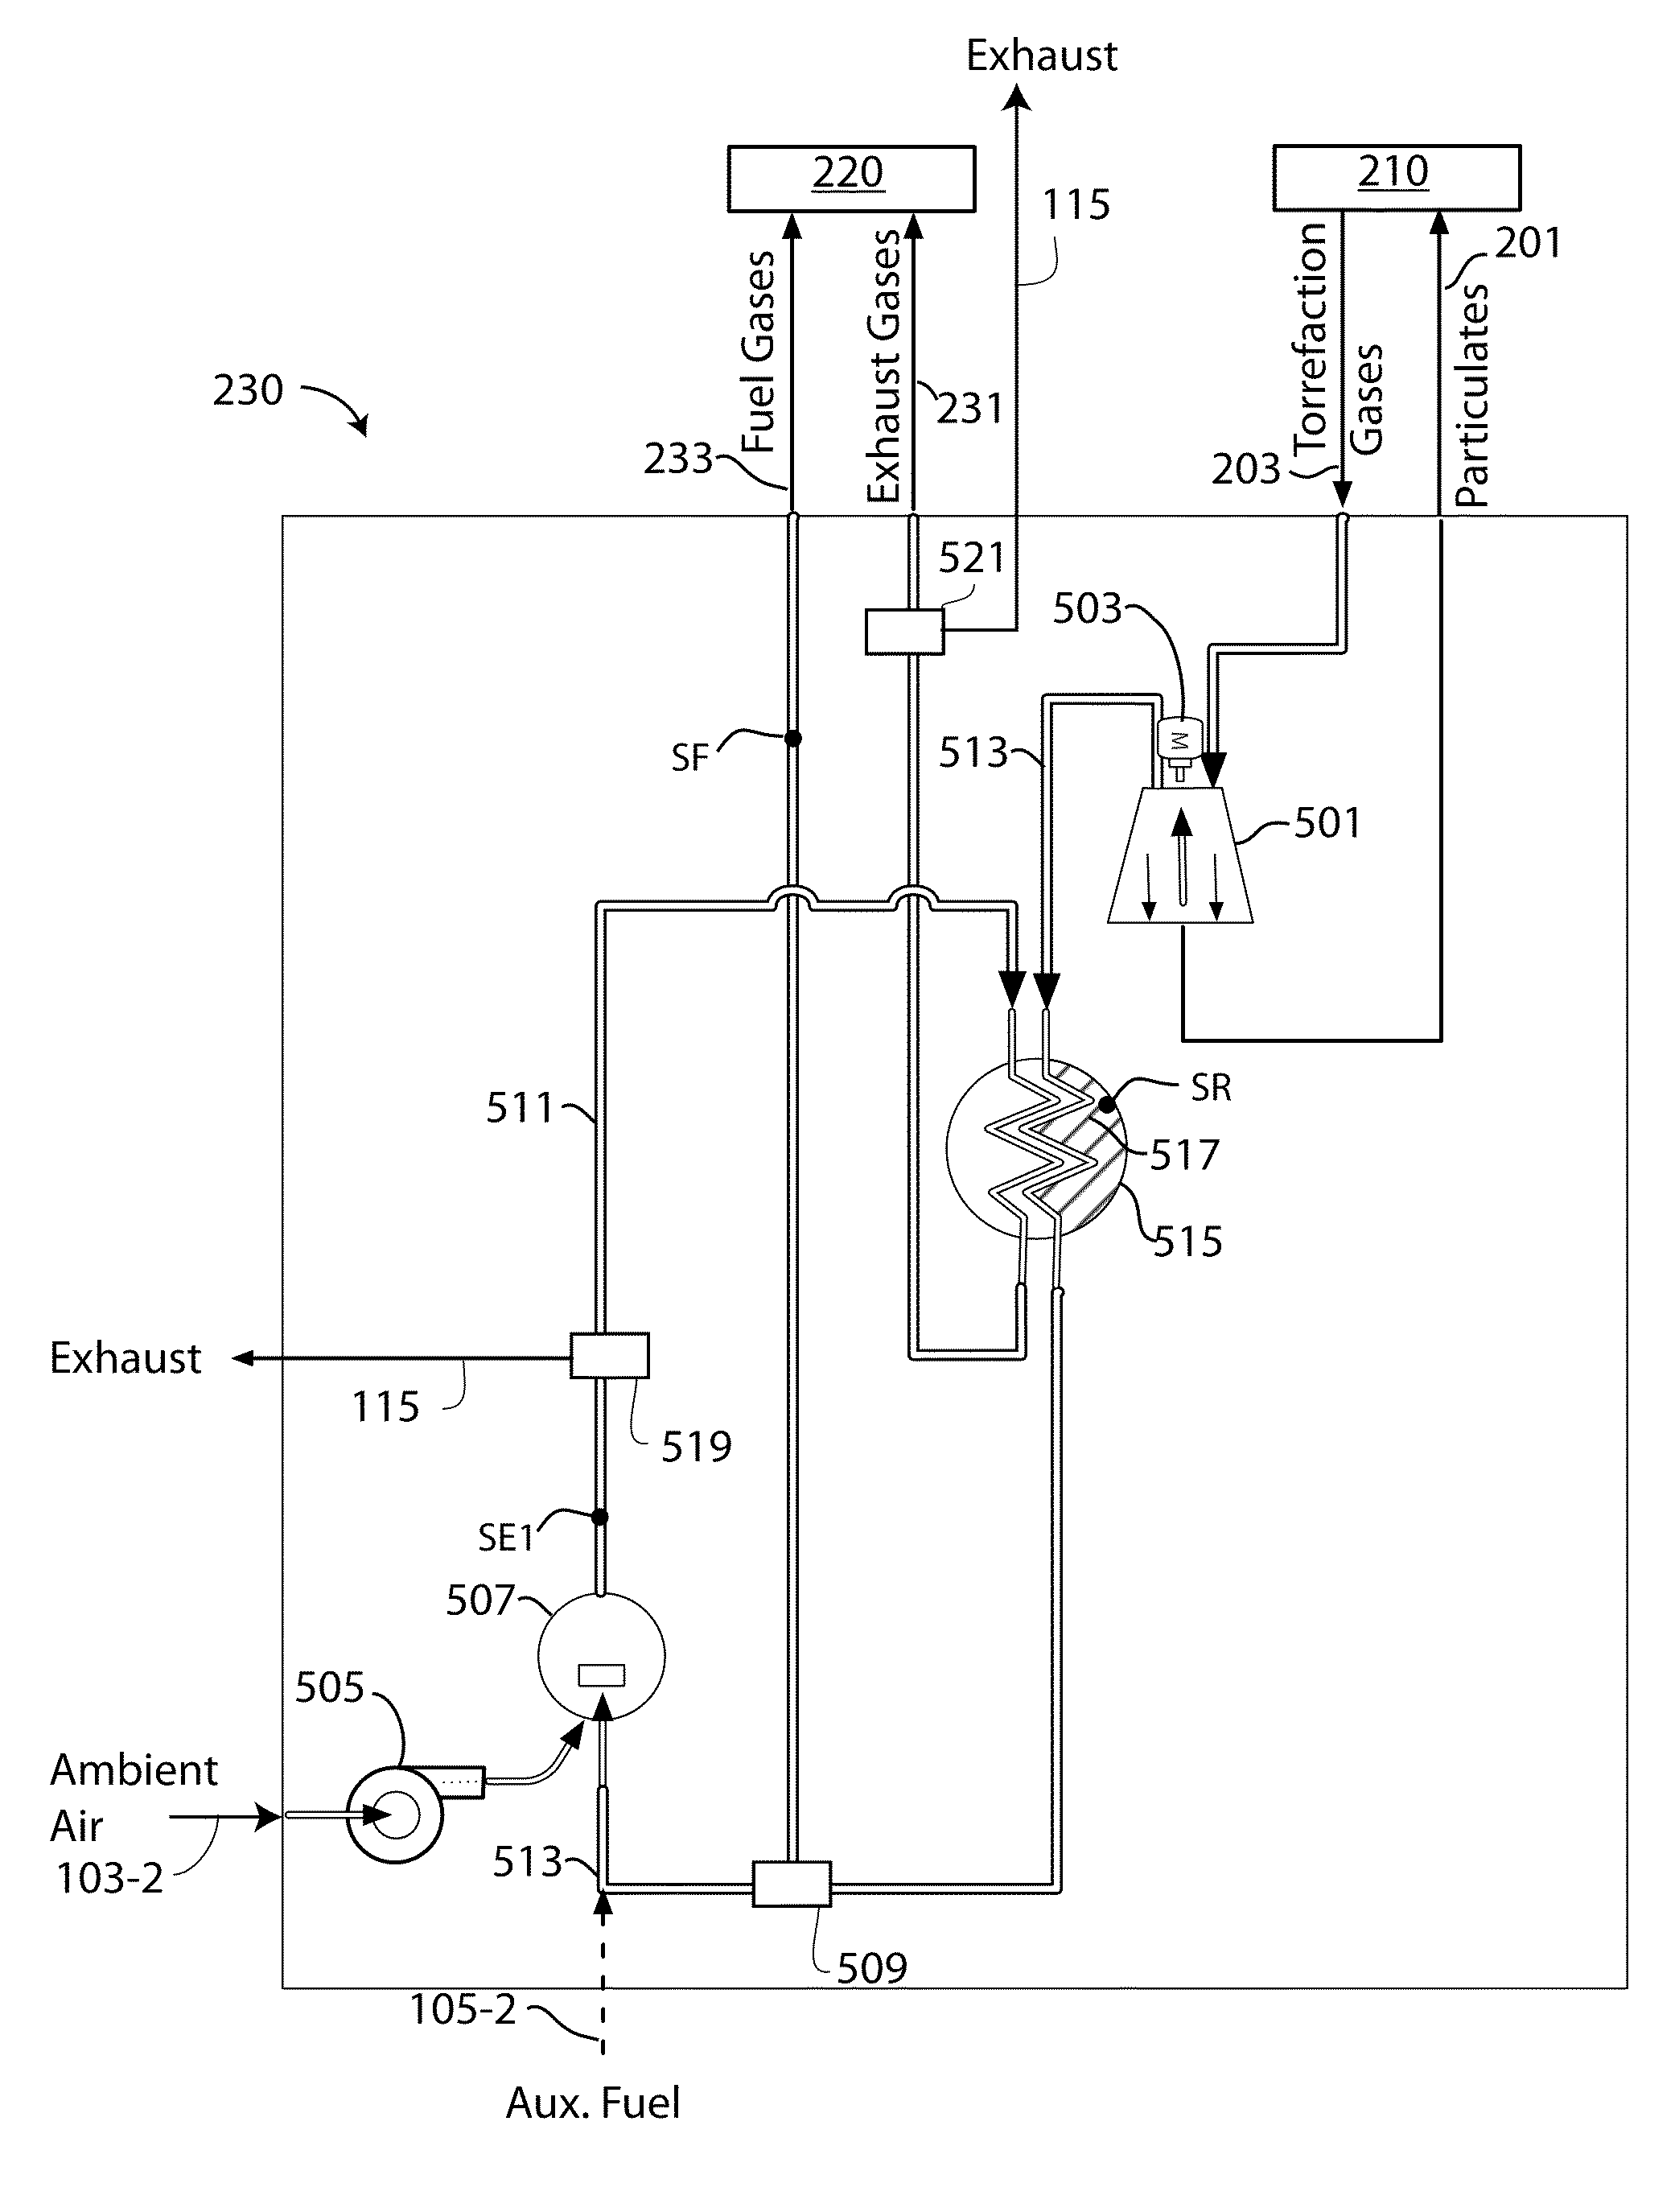 Device and method for conversion of biomass to biofuel